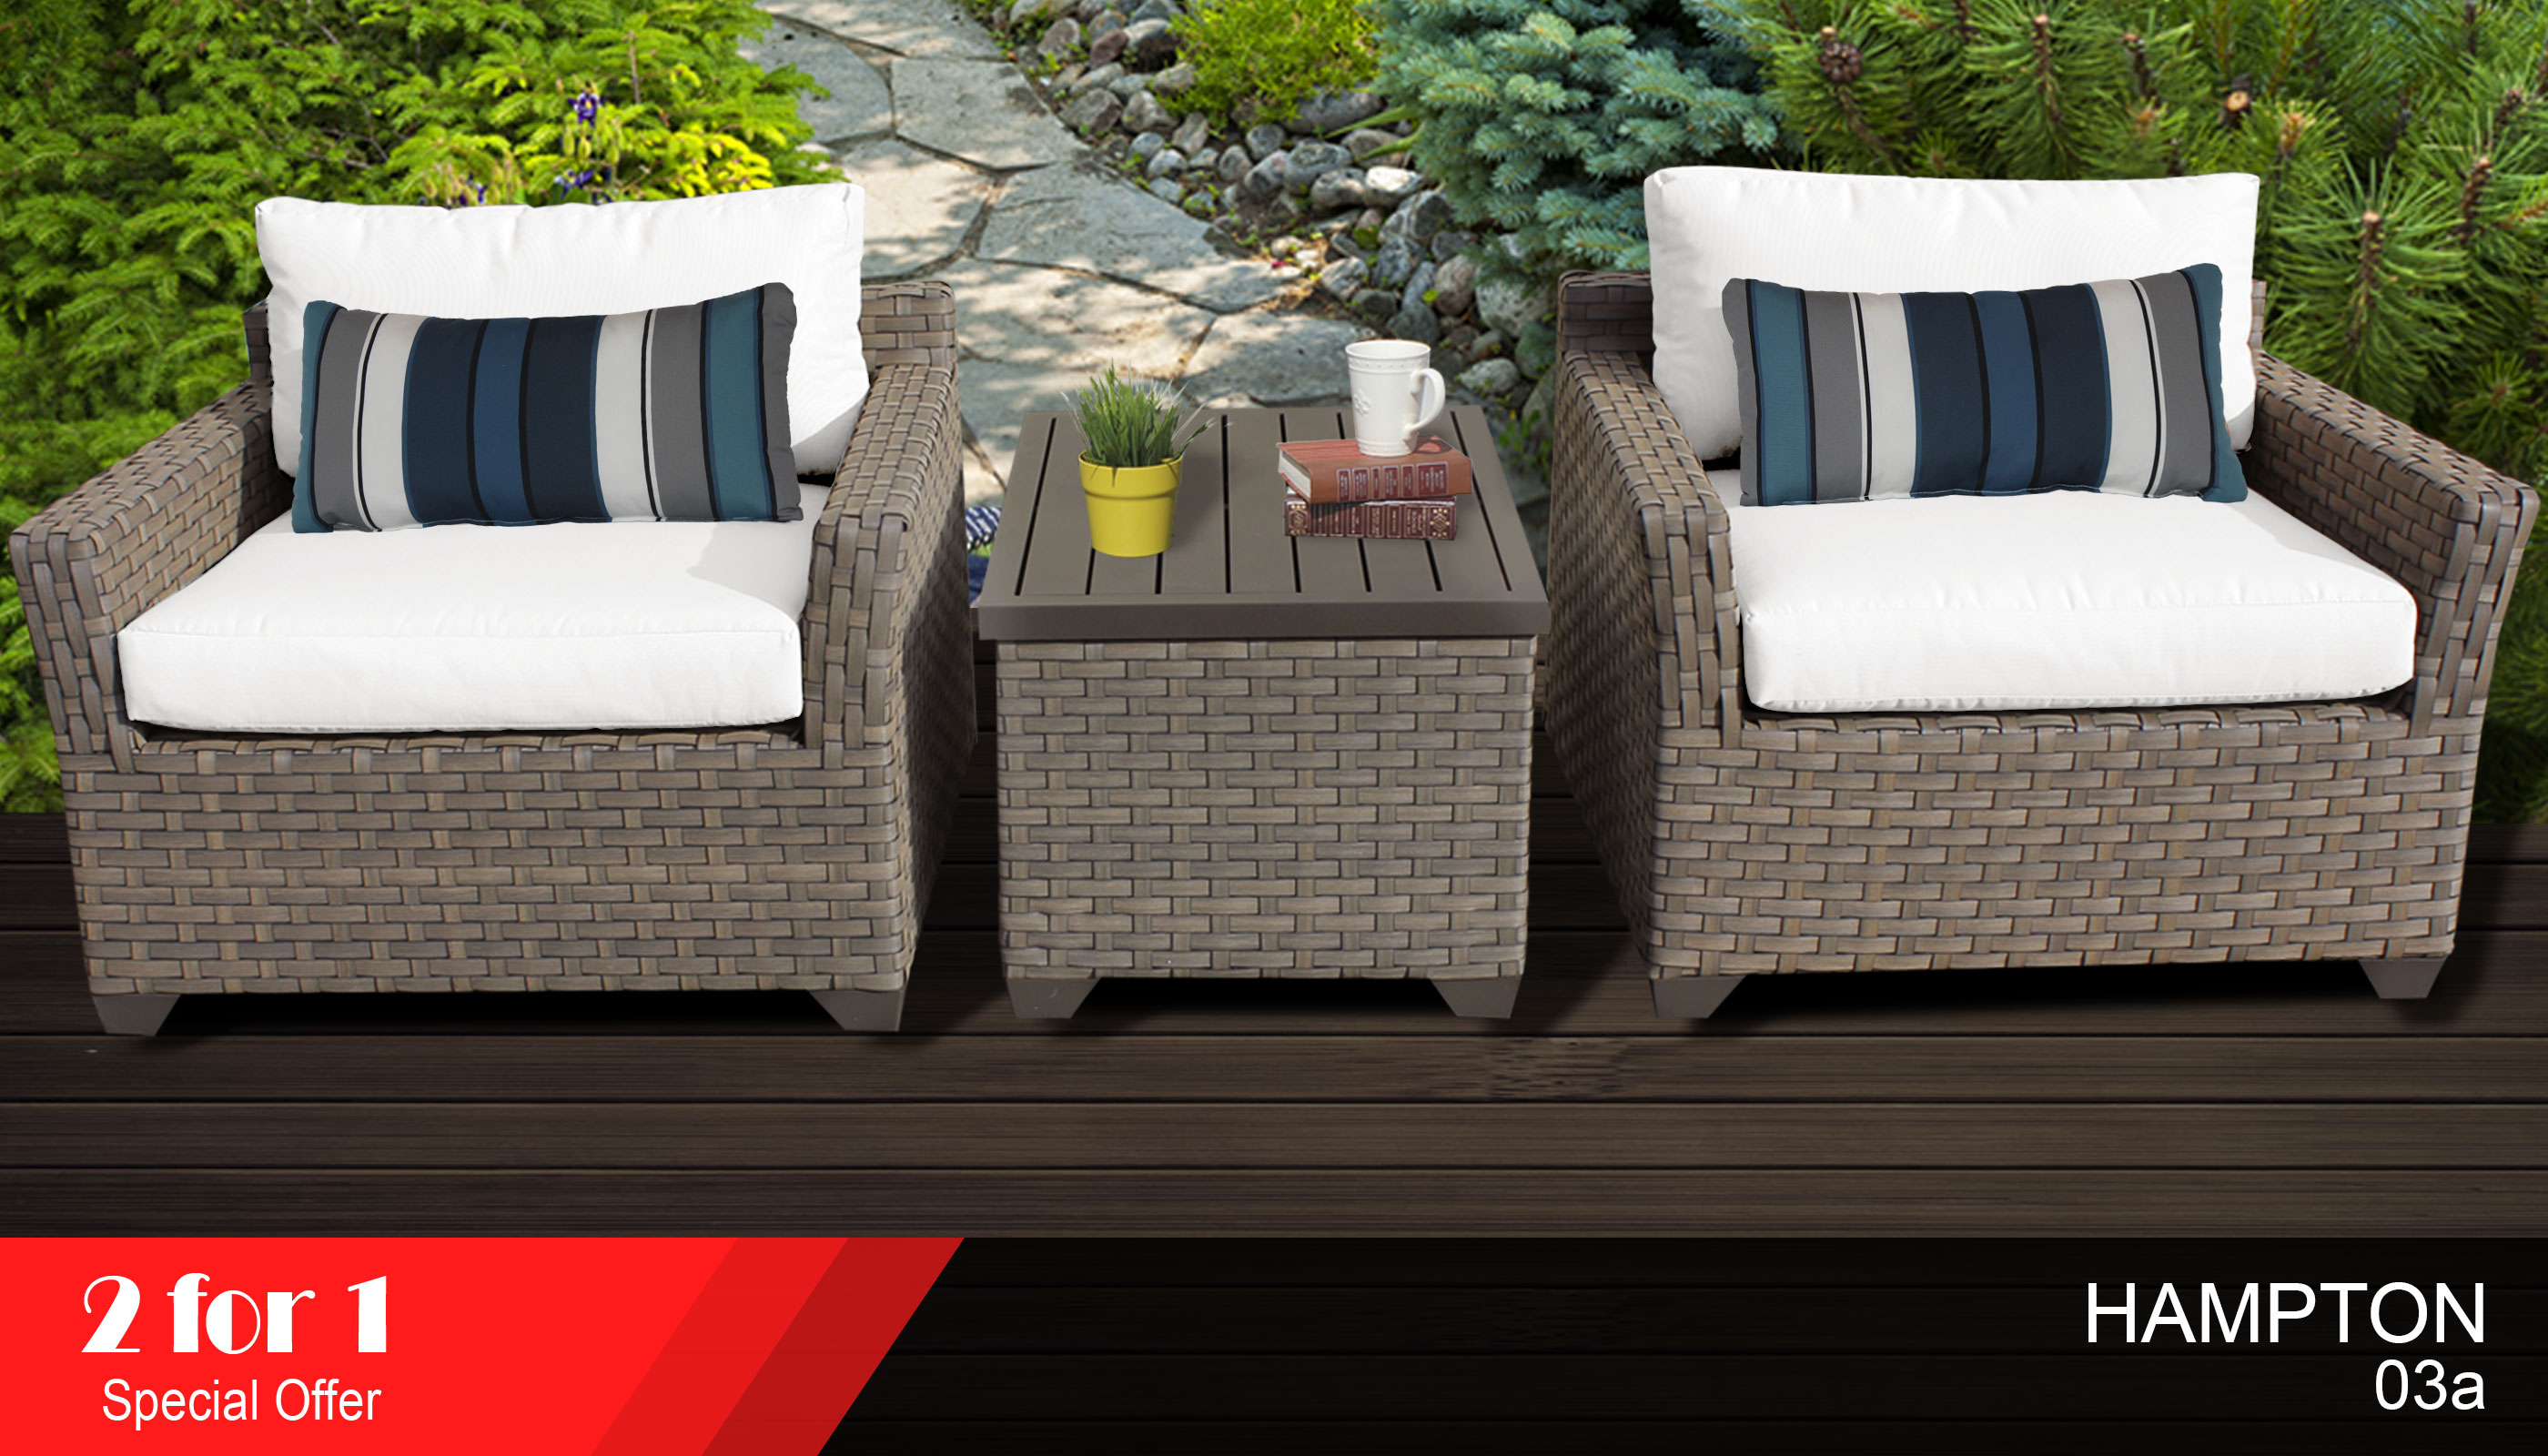 Details About Hampton 3 Piece Outdoor Wicker Patio Furniture Set 03a 2 For 1 pertaining to size 2800 X 1600